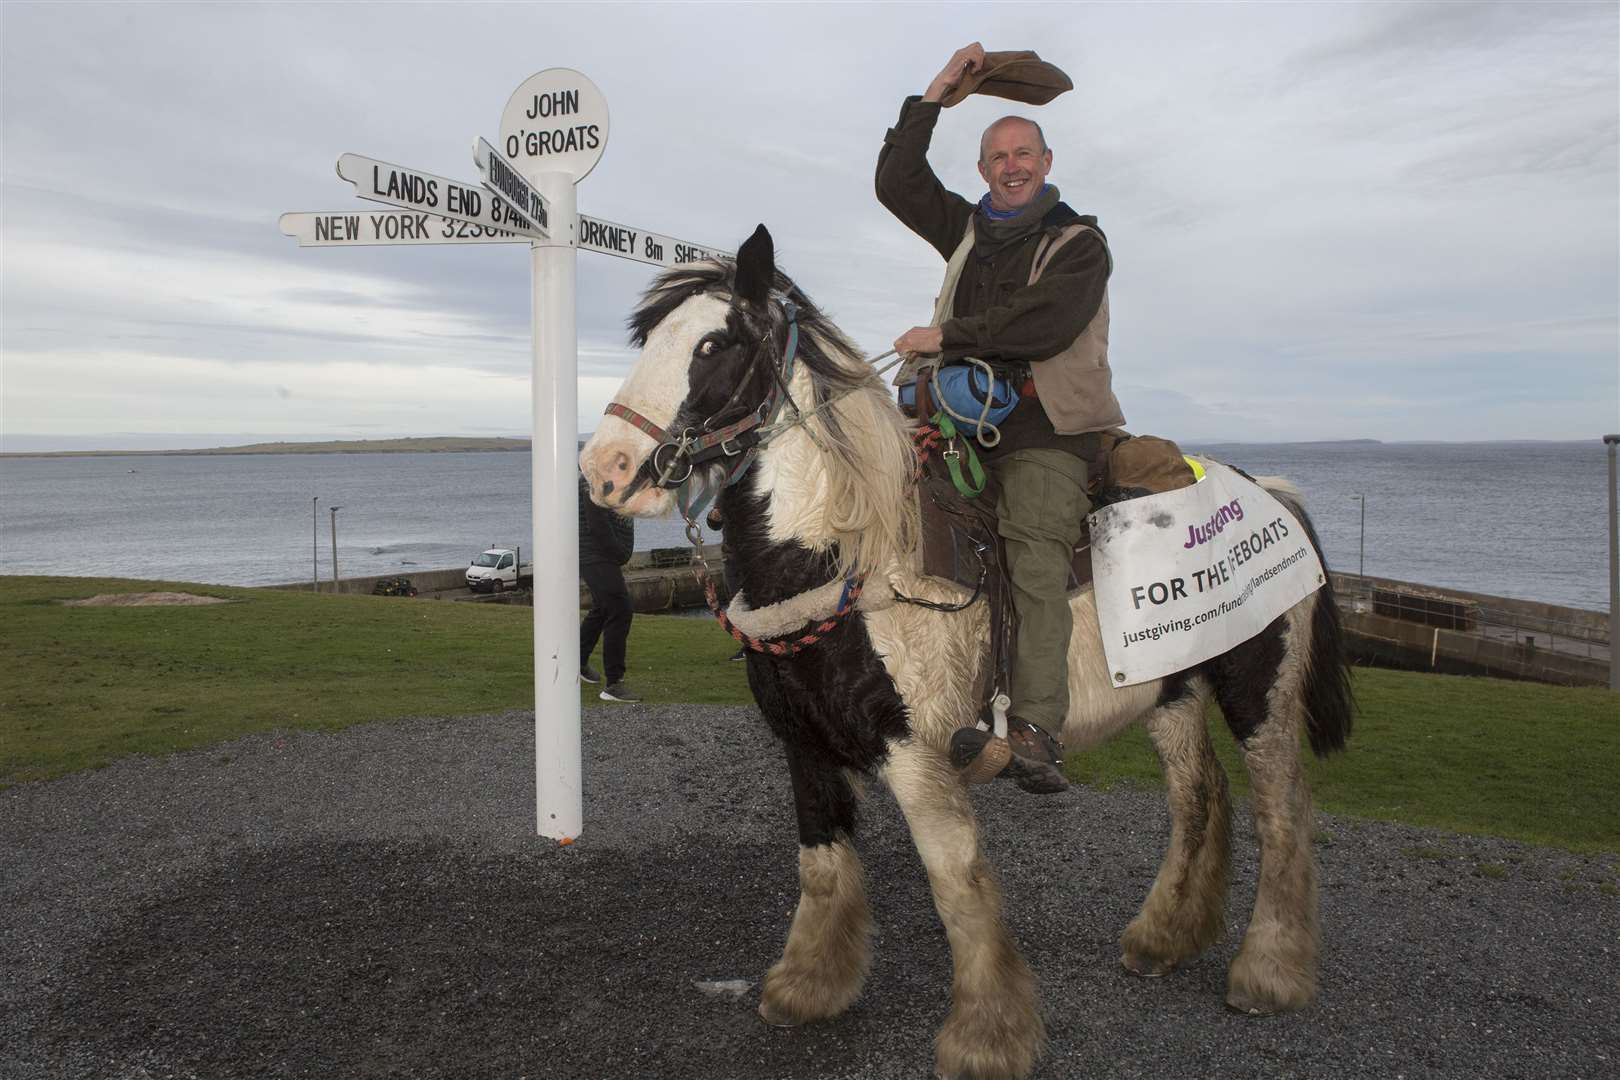 Barry Johnson and his horse Barney arrived at John O'Groats on Tuesday after completing their long journey. Picture: Robert MacDonald/Northern Studios